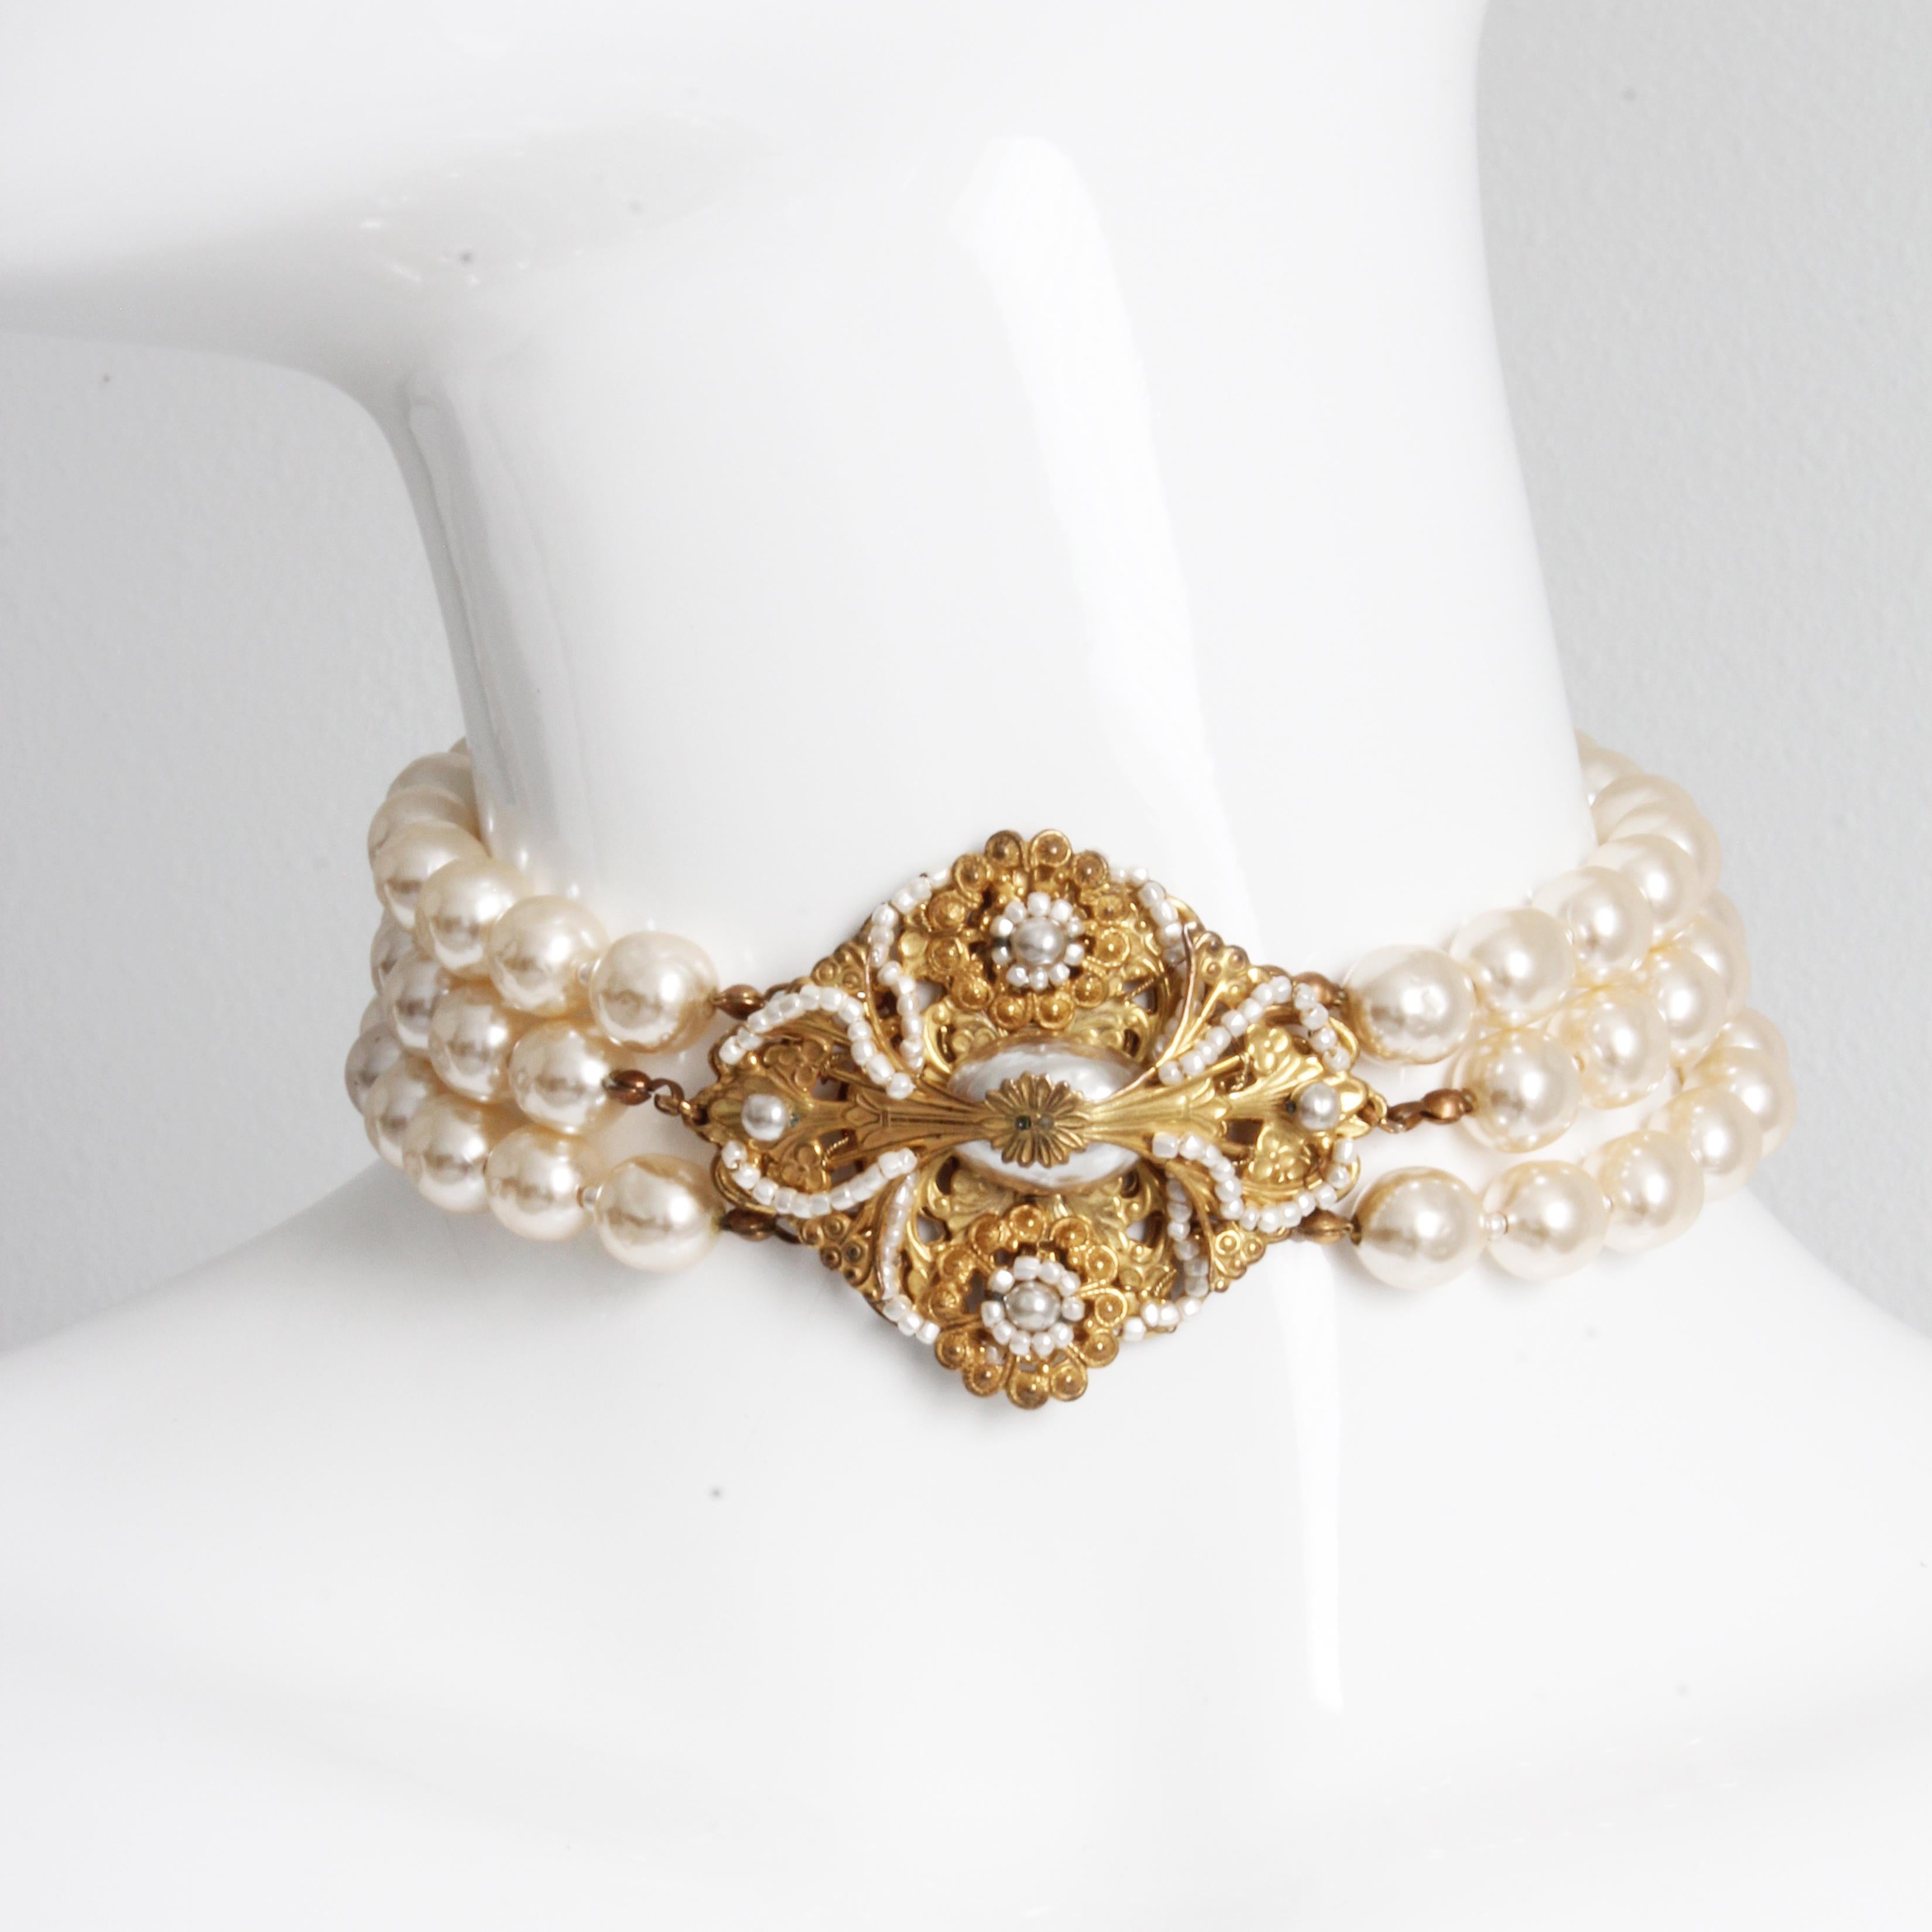 Authentic, preowned, vintage Miriam Haskell Triple Strand Baroque Choker Necklace, likely made in the 1970s.  Features triple strand glass pearls and gold metal floral filigree pendant adorned with tiny pearl seed beads.  Unusual style; fastens with